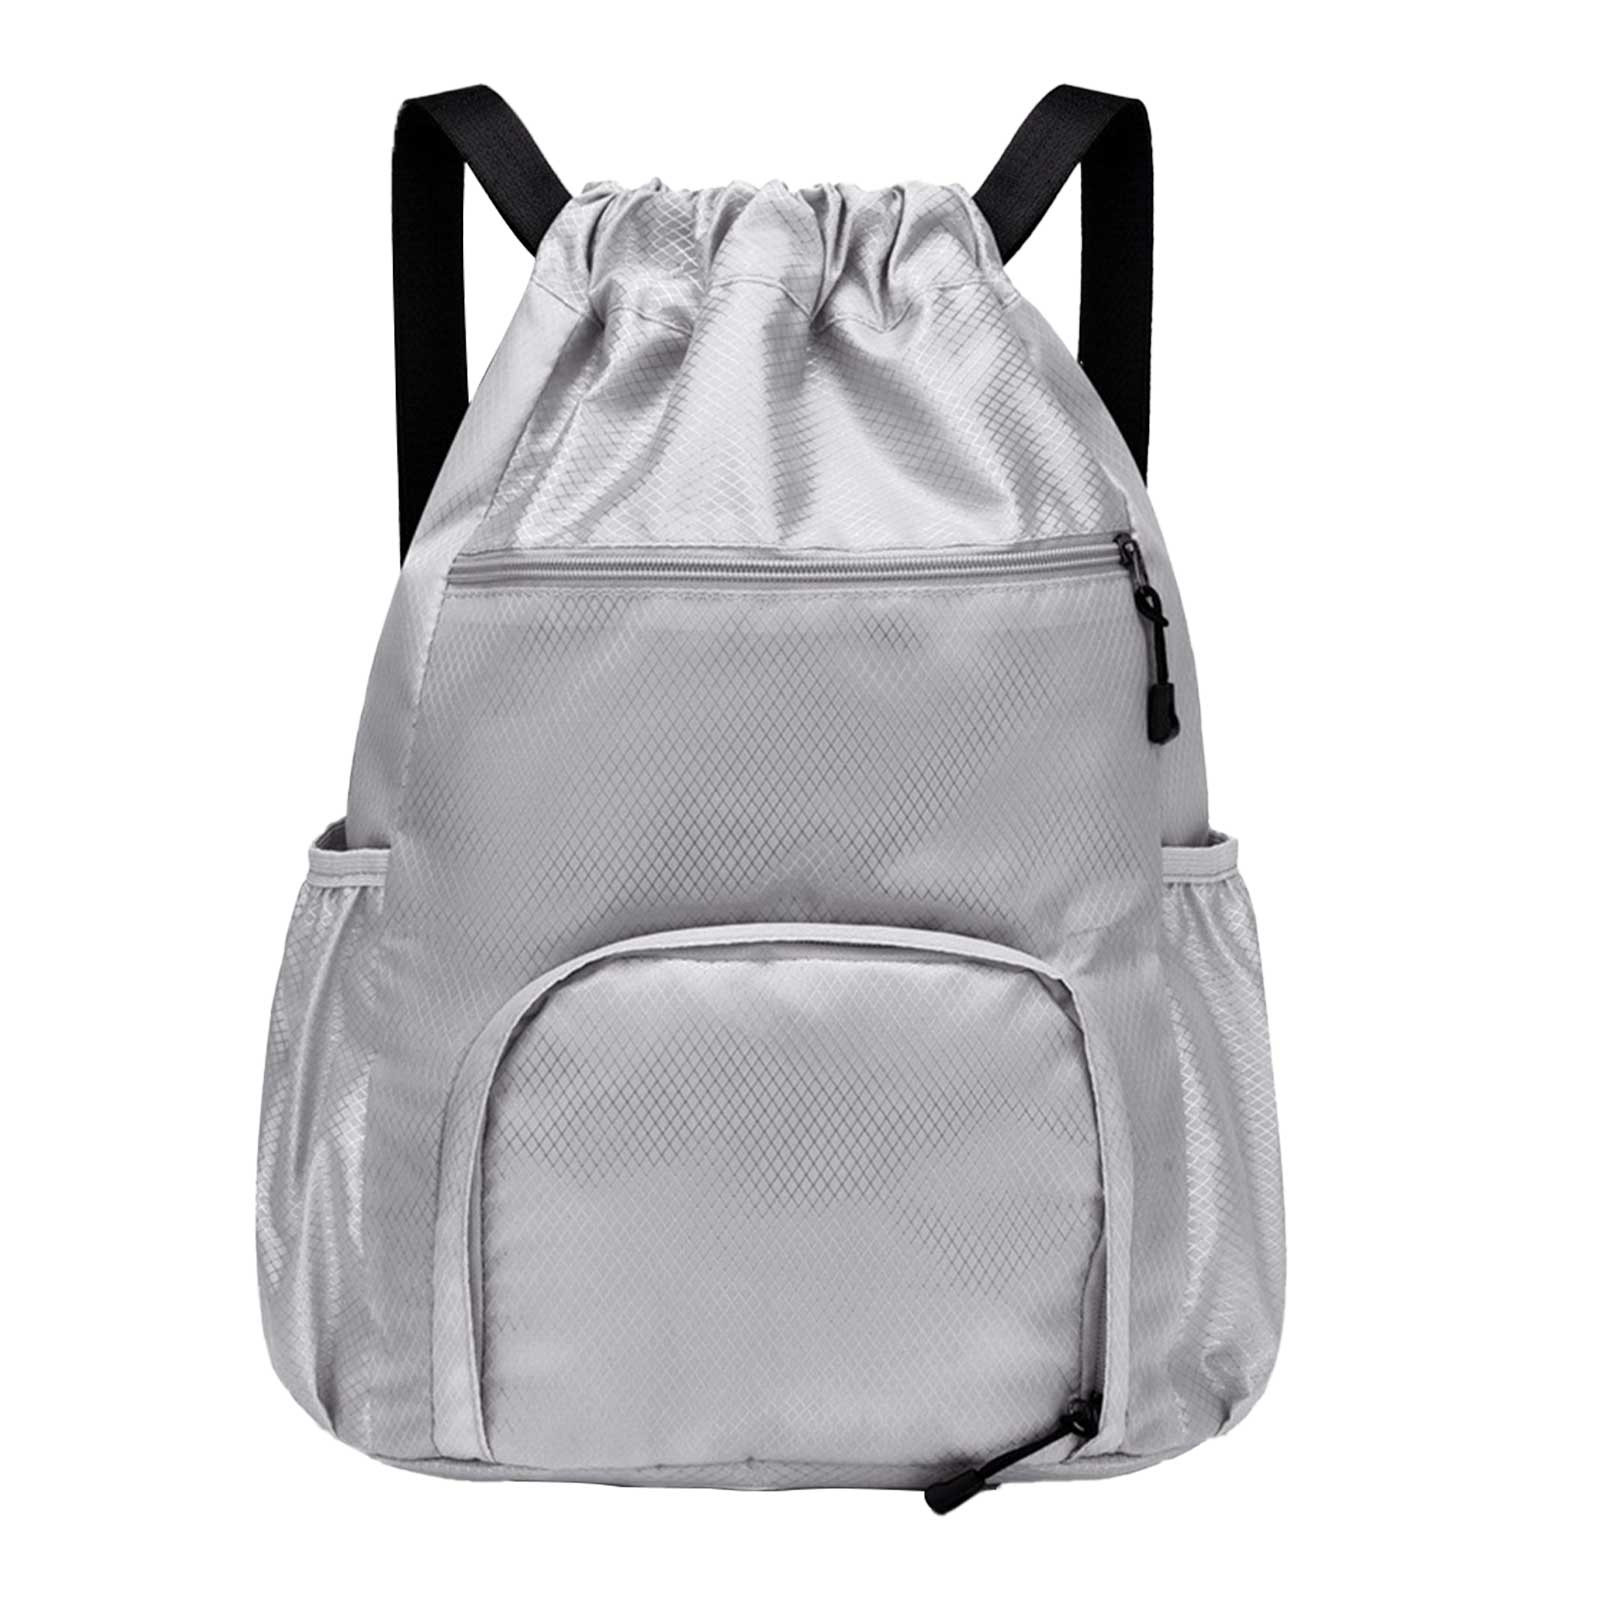 Sports Outdoors Sports Accessories Mesh Basketball Football Bag With Ball And Shoe Compartment For Boys Girls Man Women Ball Equipment Pack Soccer Backpack Sports Volleyball Gray - image 2 of 8